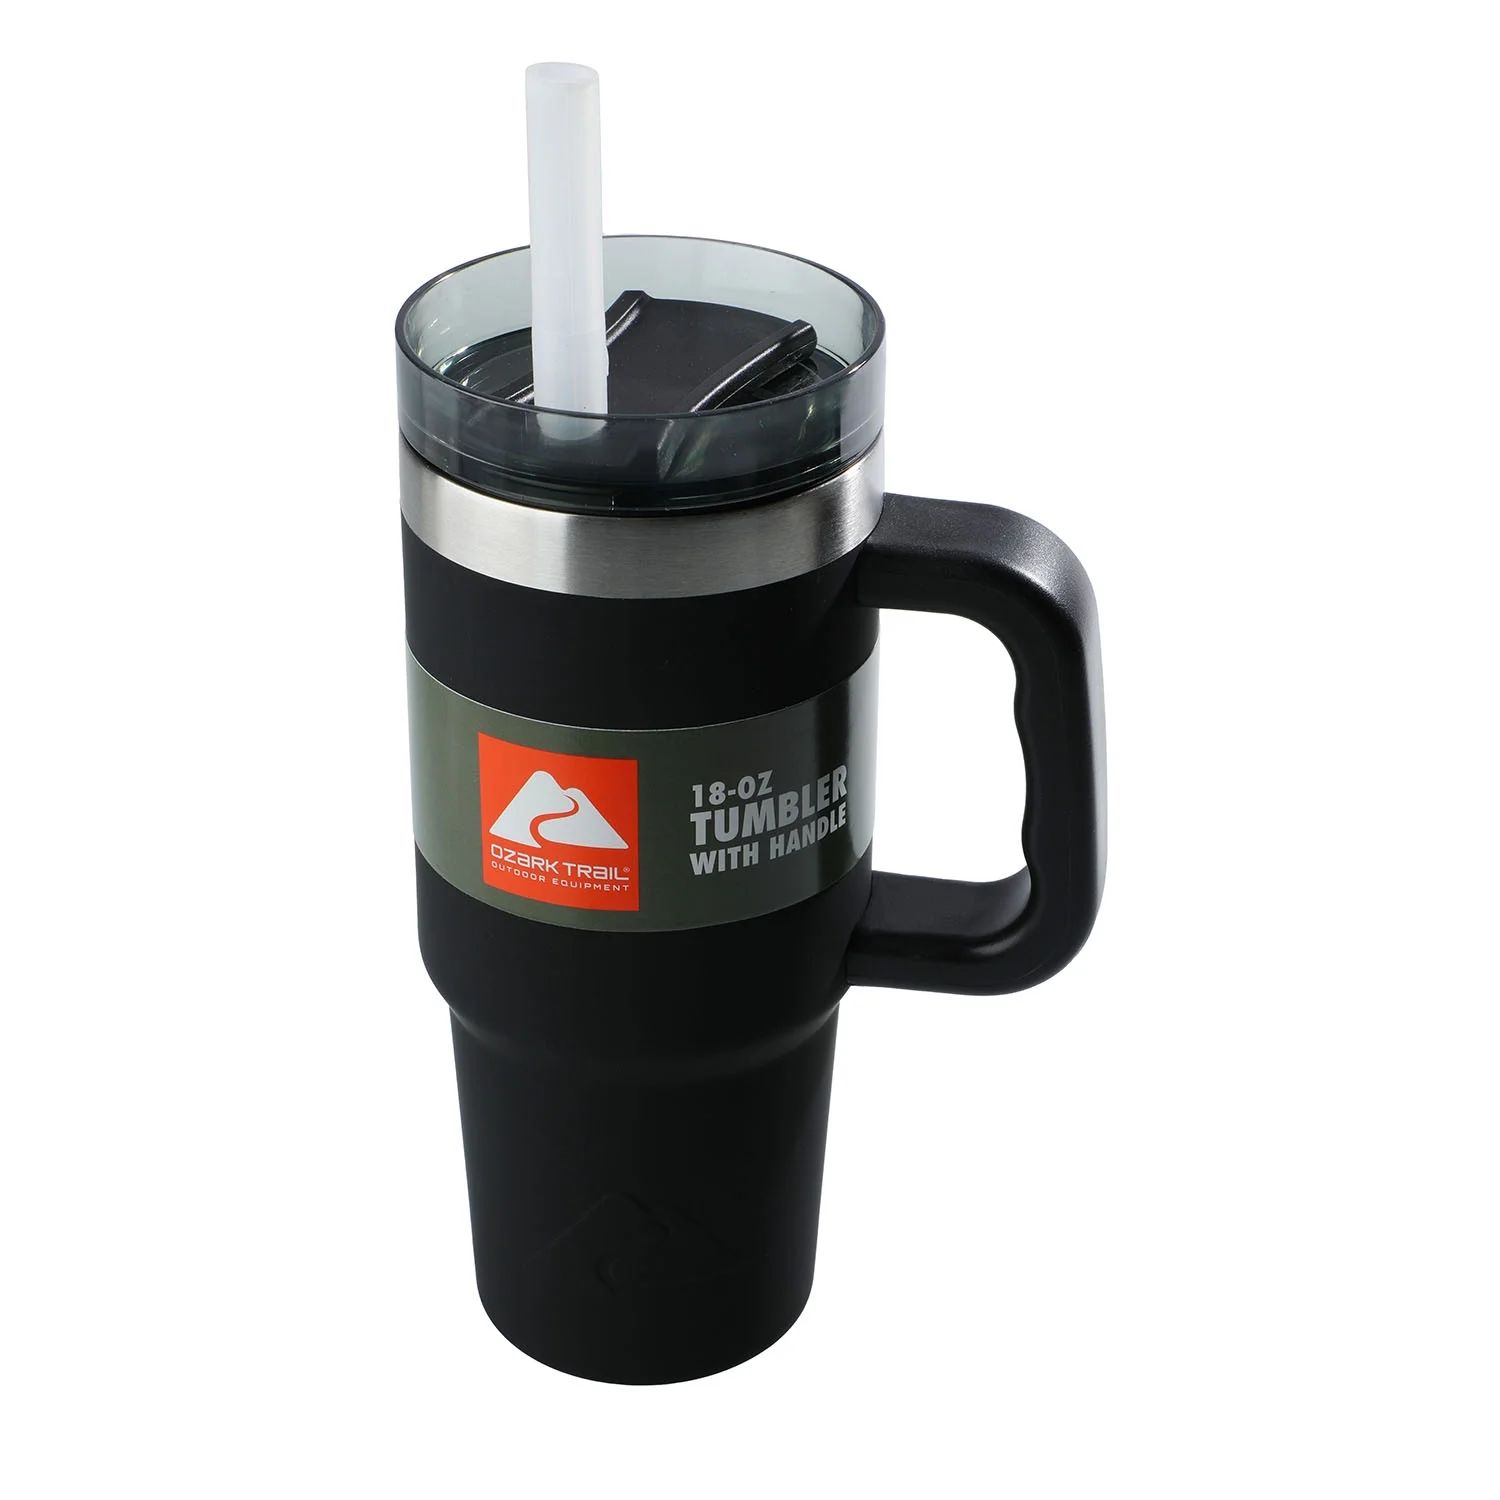 Ozark Trail 18 oz Insulated Stainless Steel Tumbler with Handle - Black | Walmart (US)